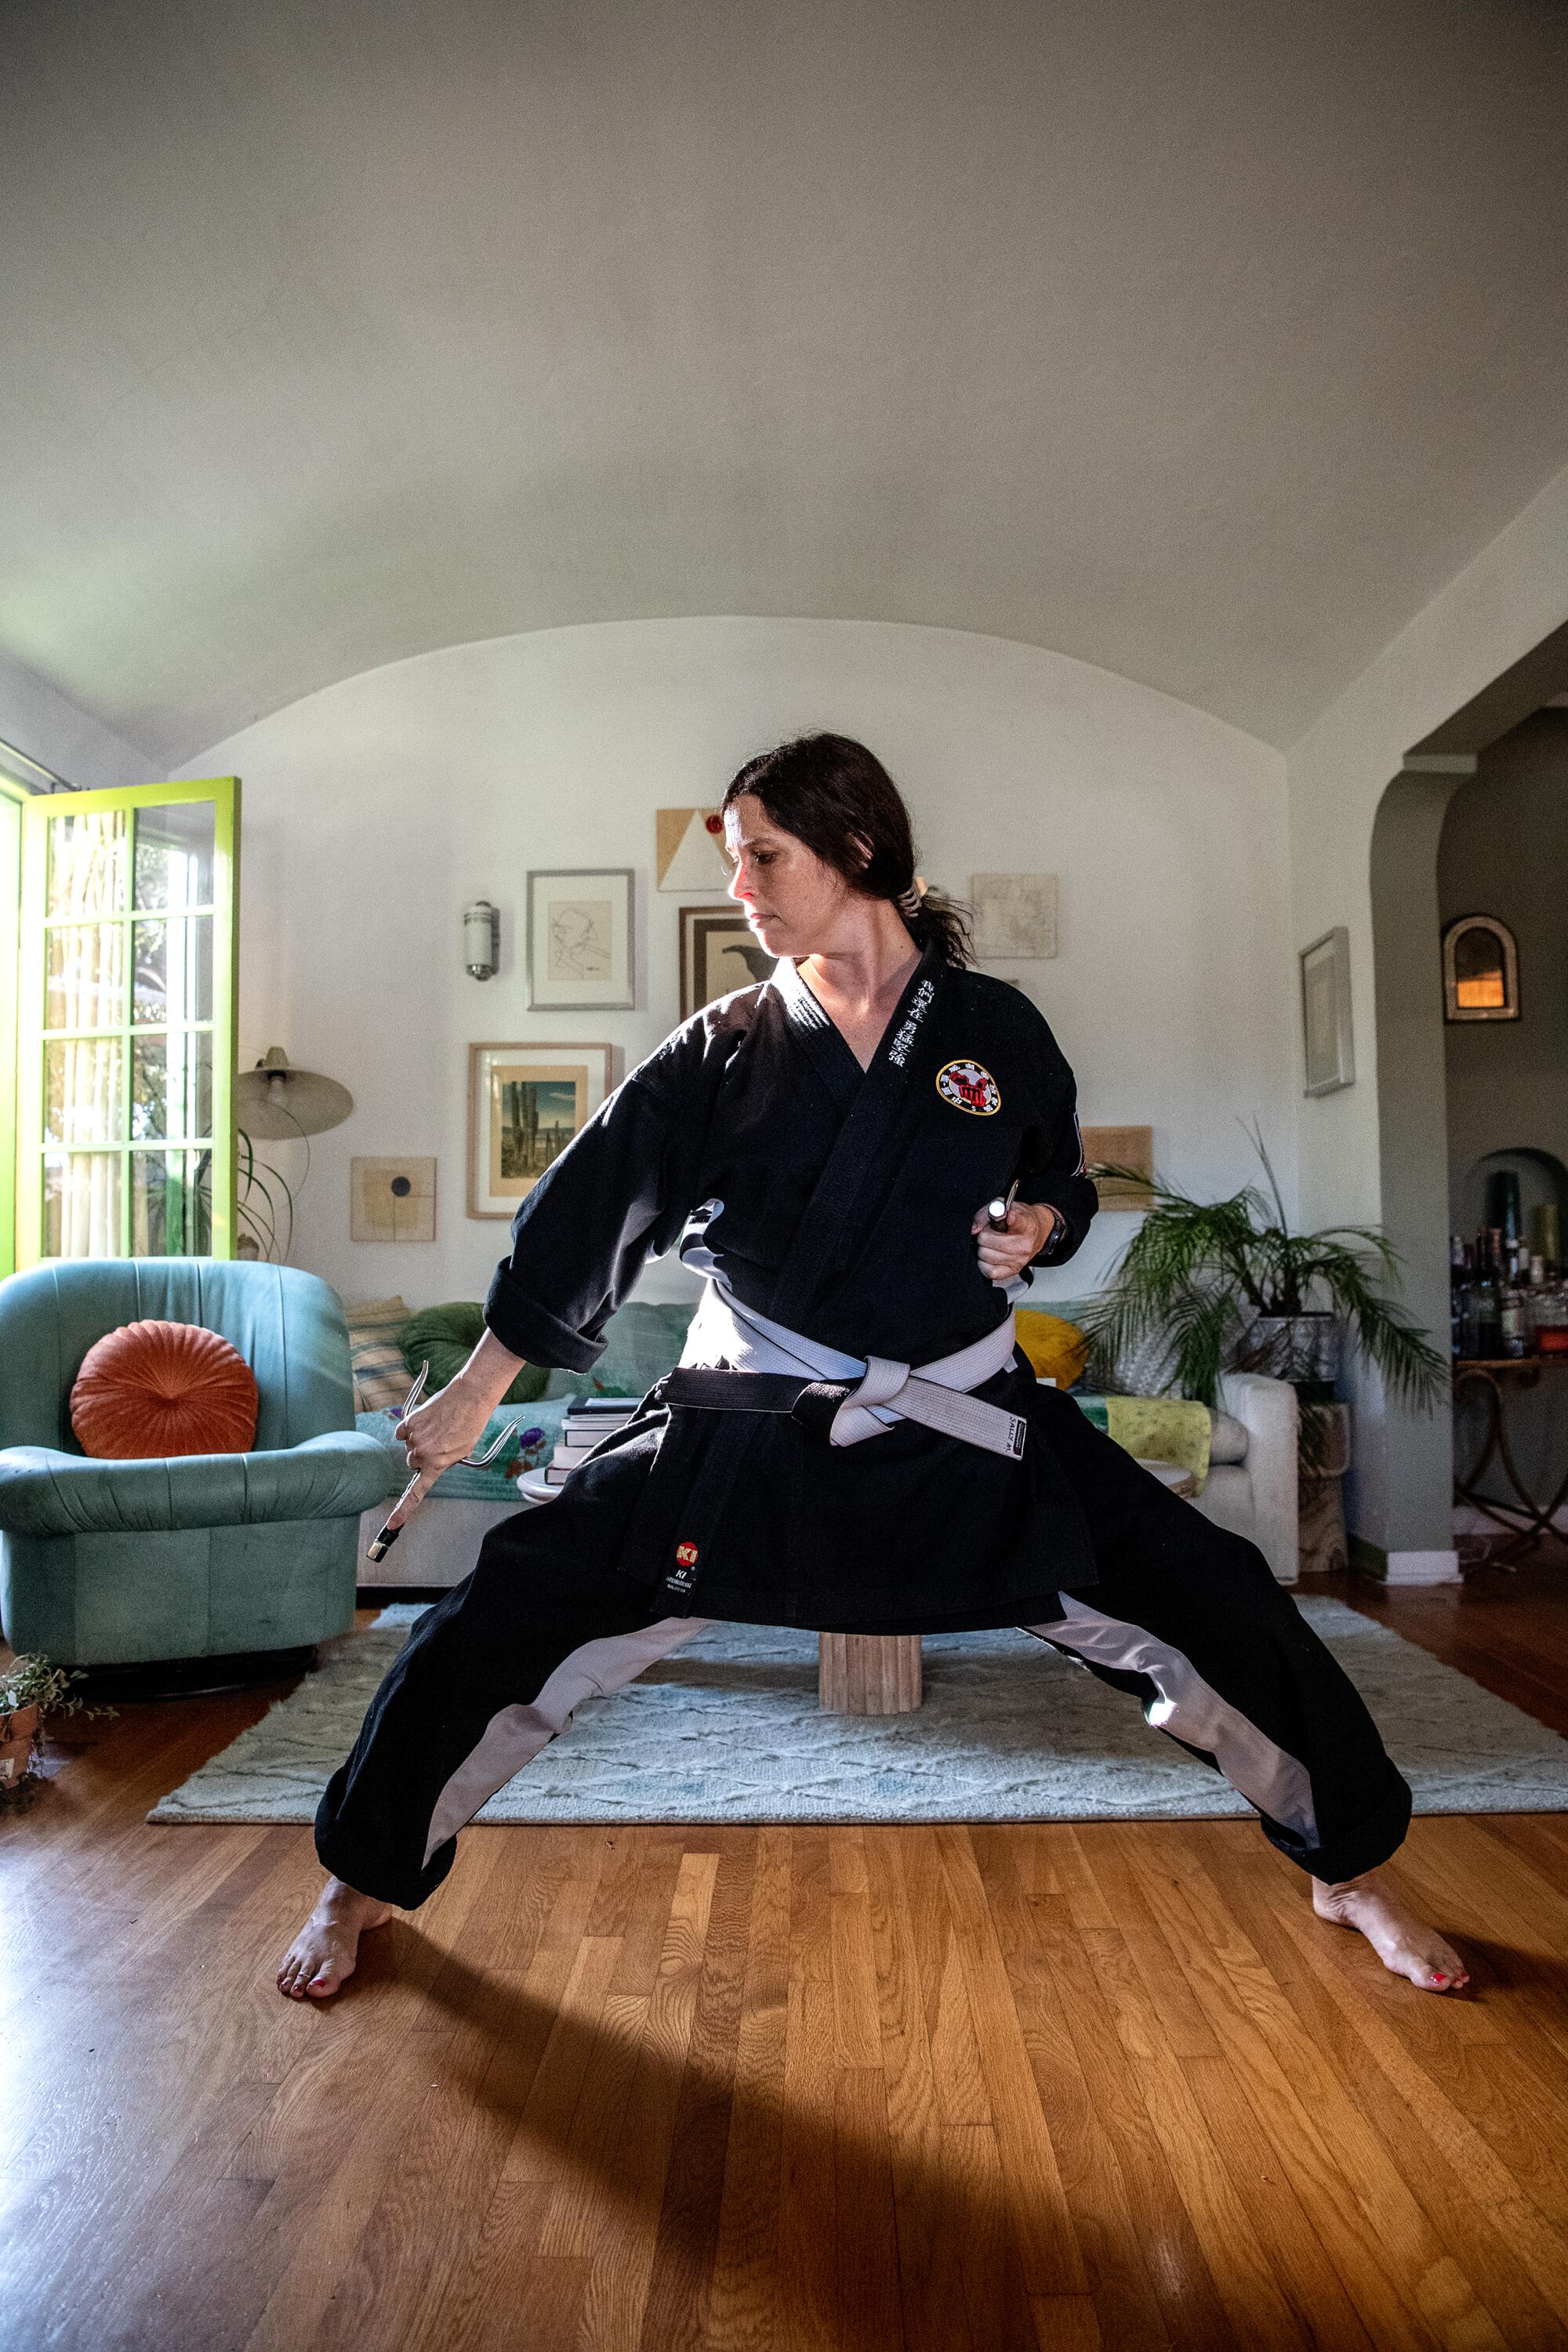 Sally Montana standing in a living room, wearing a gi and striking a martial arts stance.